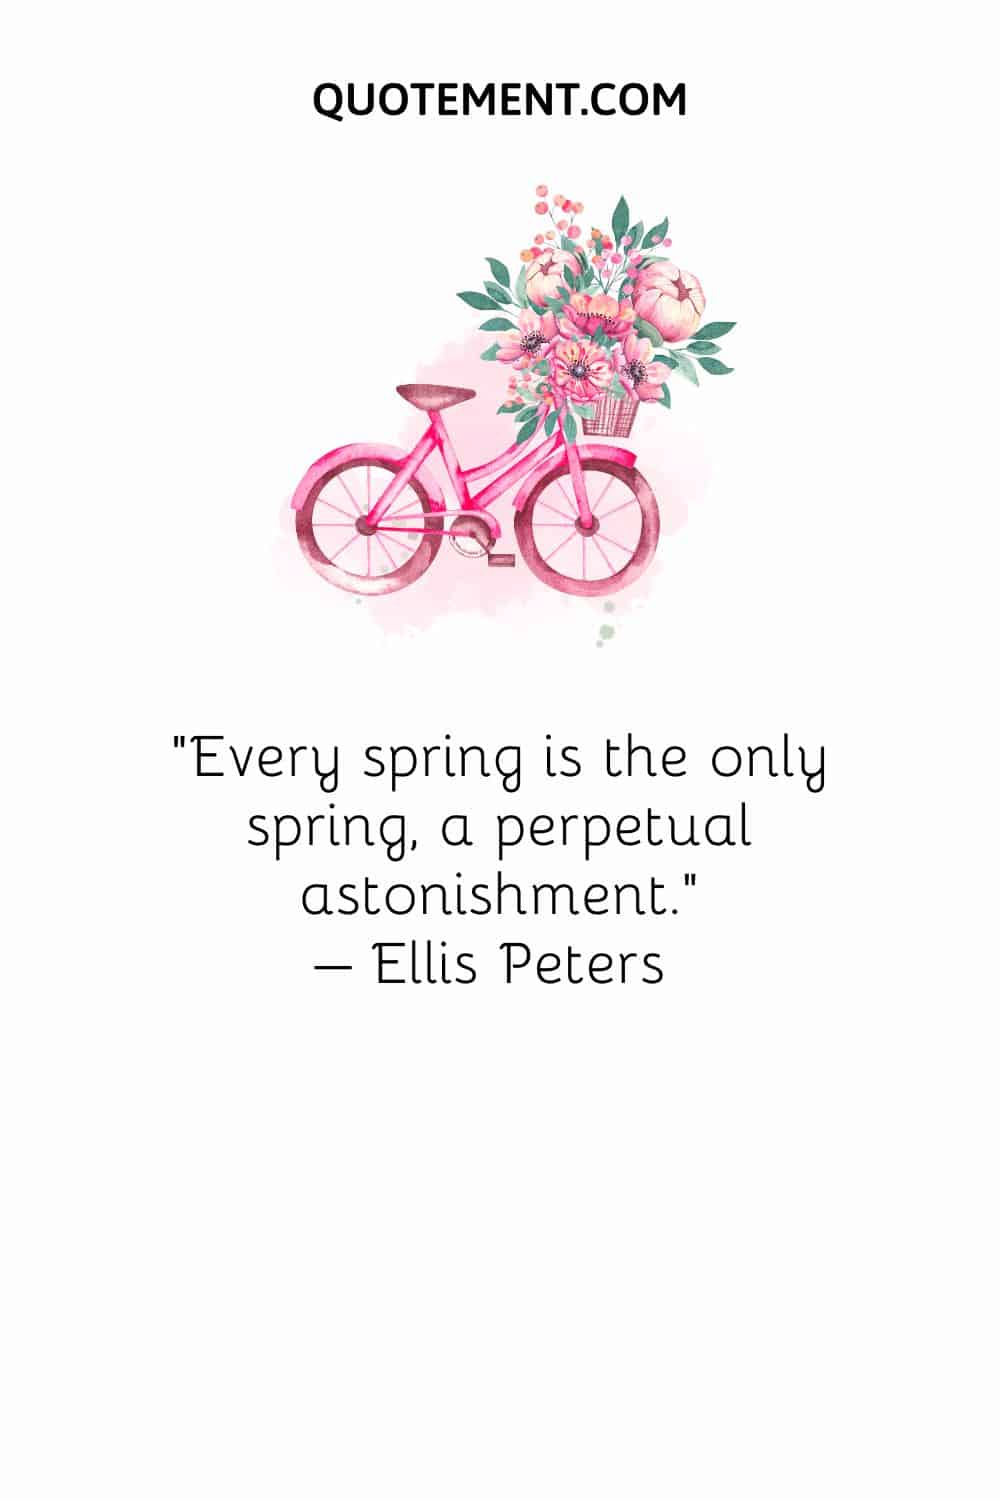 Every spring is the only spring, a perpetual astonishment. – Ellis Peters